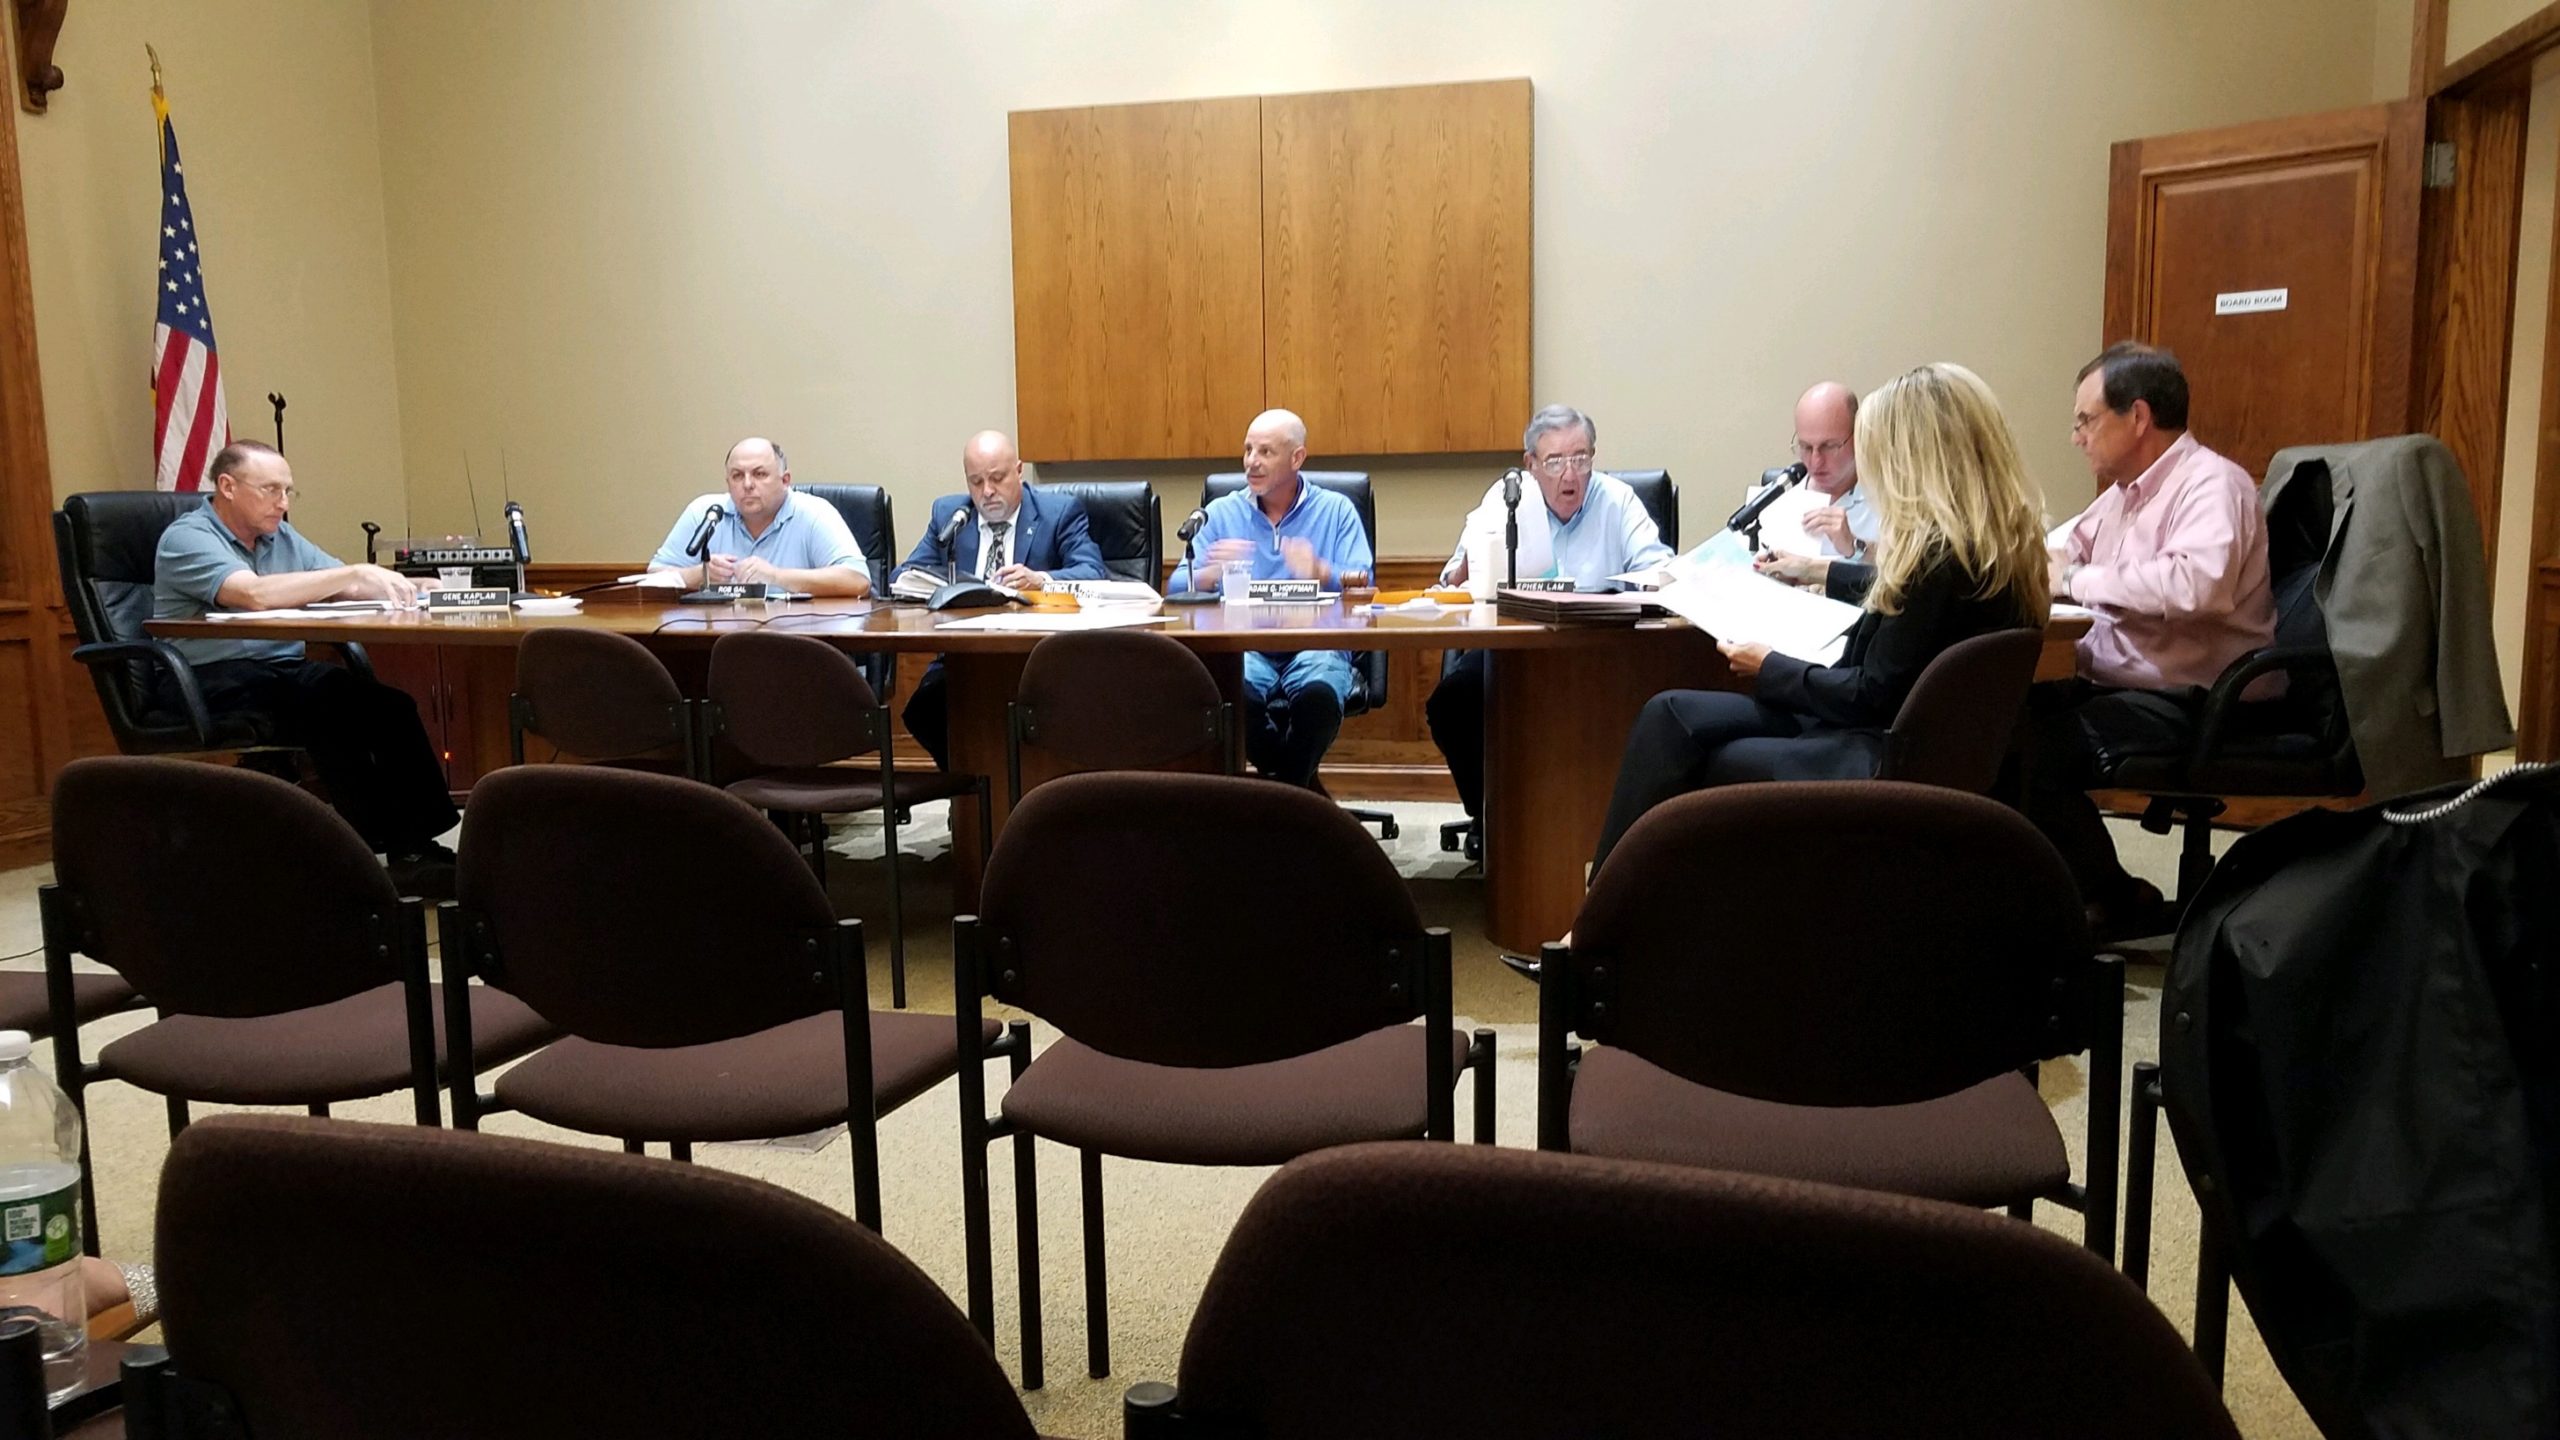 Village of Lake Success trustees met on Tuesday night to discuss various items, including a cybersecurity proposal, payments for equipment, and the state of the village’s sewer system. (Photo by Janelle Clausen)